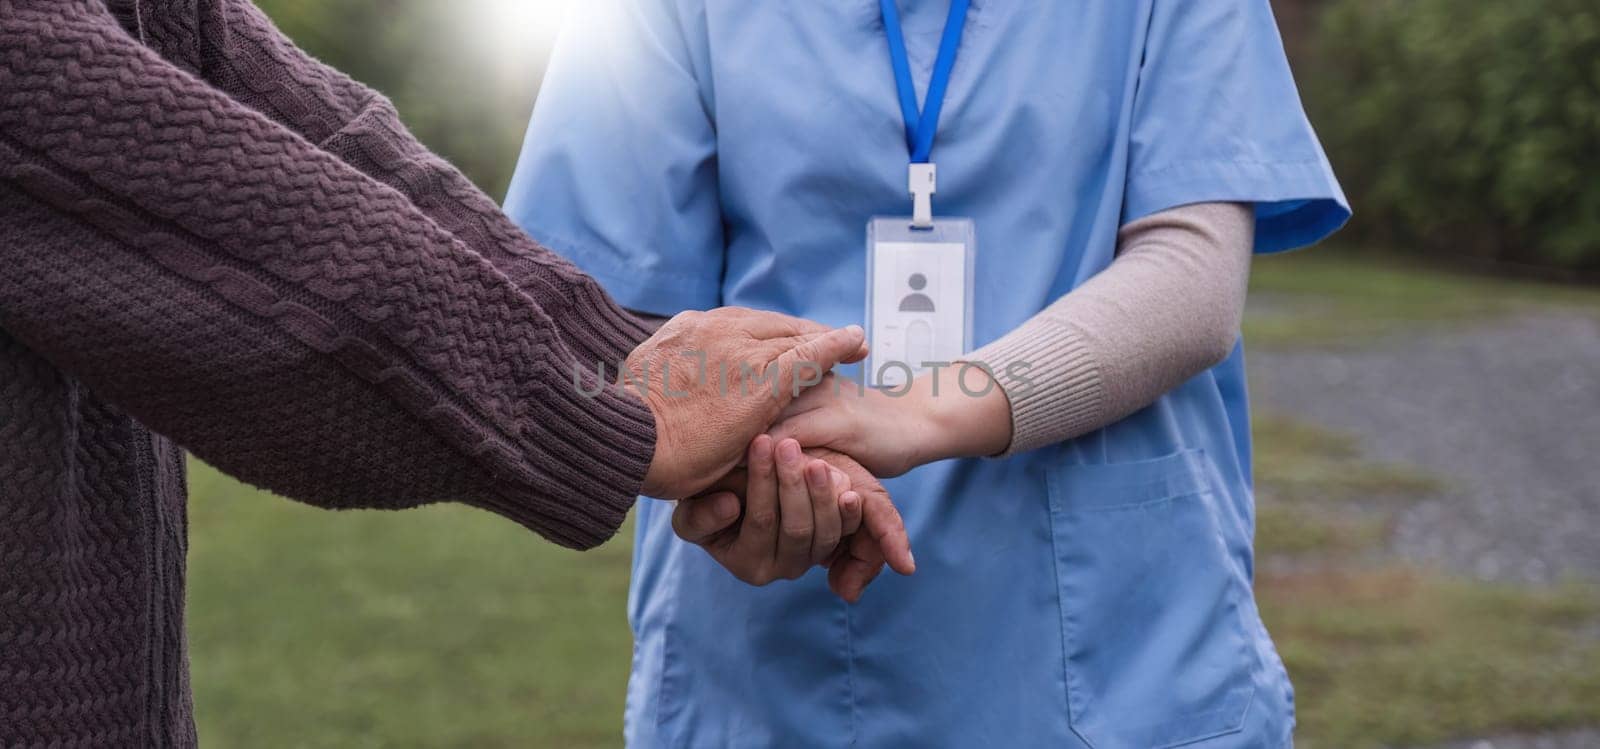 close up, an elderly male patient holds hands with a nurse who comes to take care of and help encourage each other..